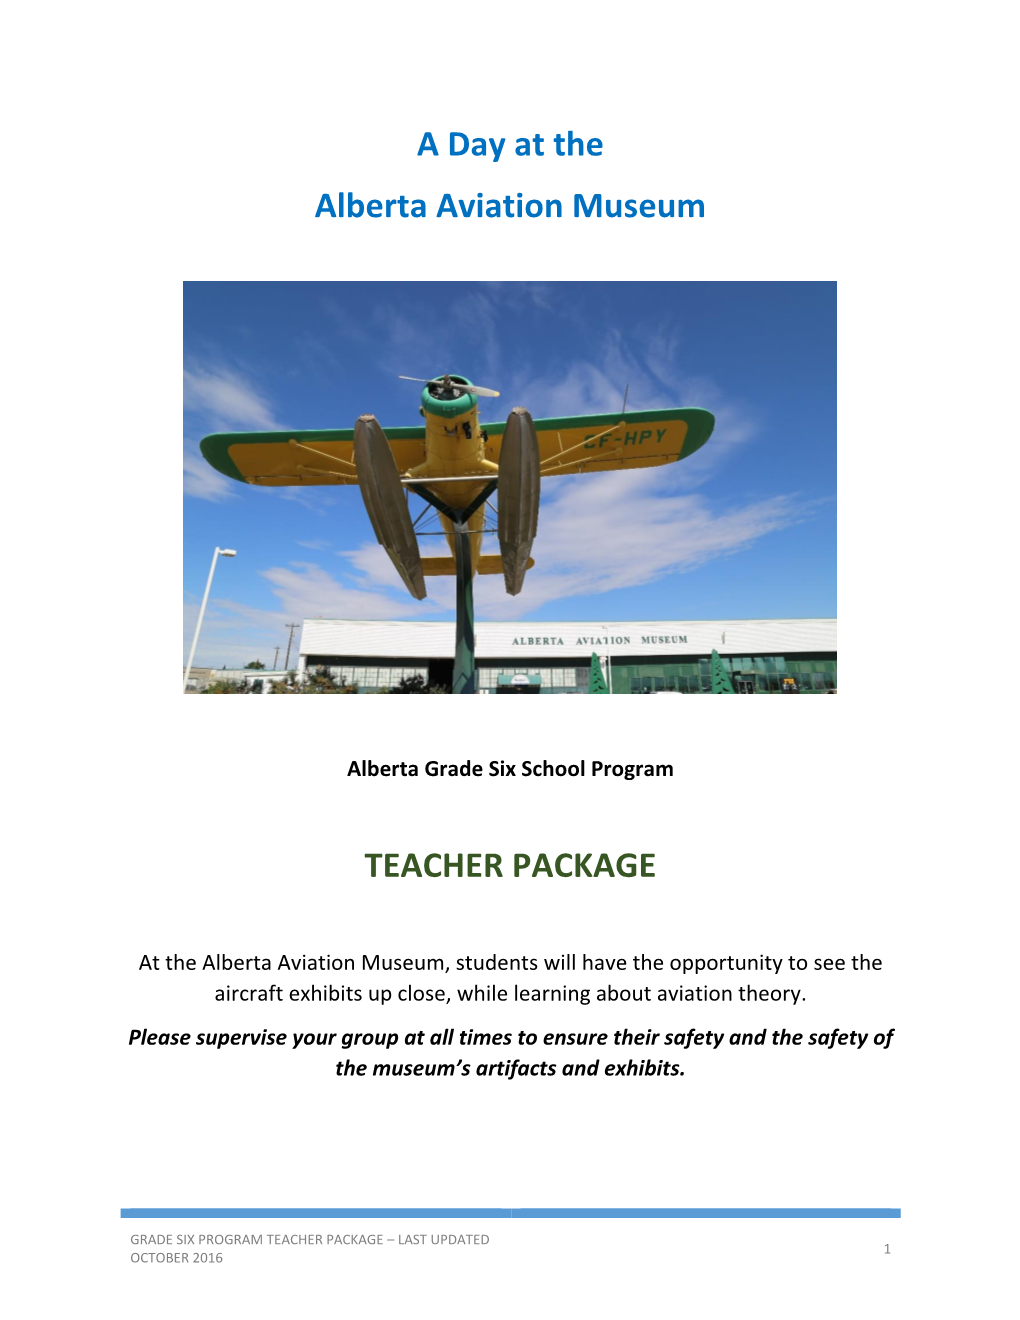 A Day at the Alberta Aviation Museum TEACHER PACKAGE